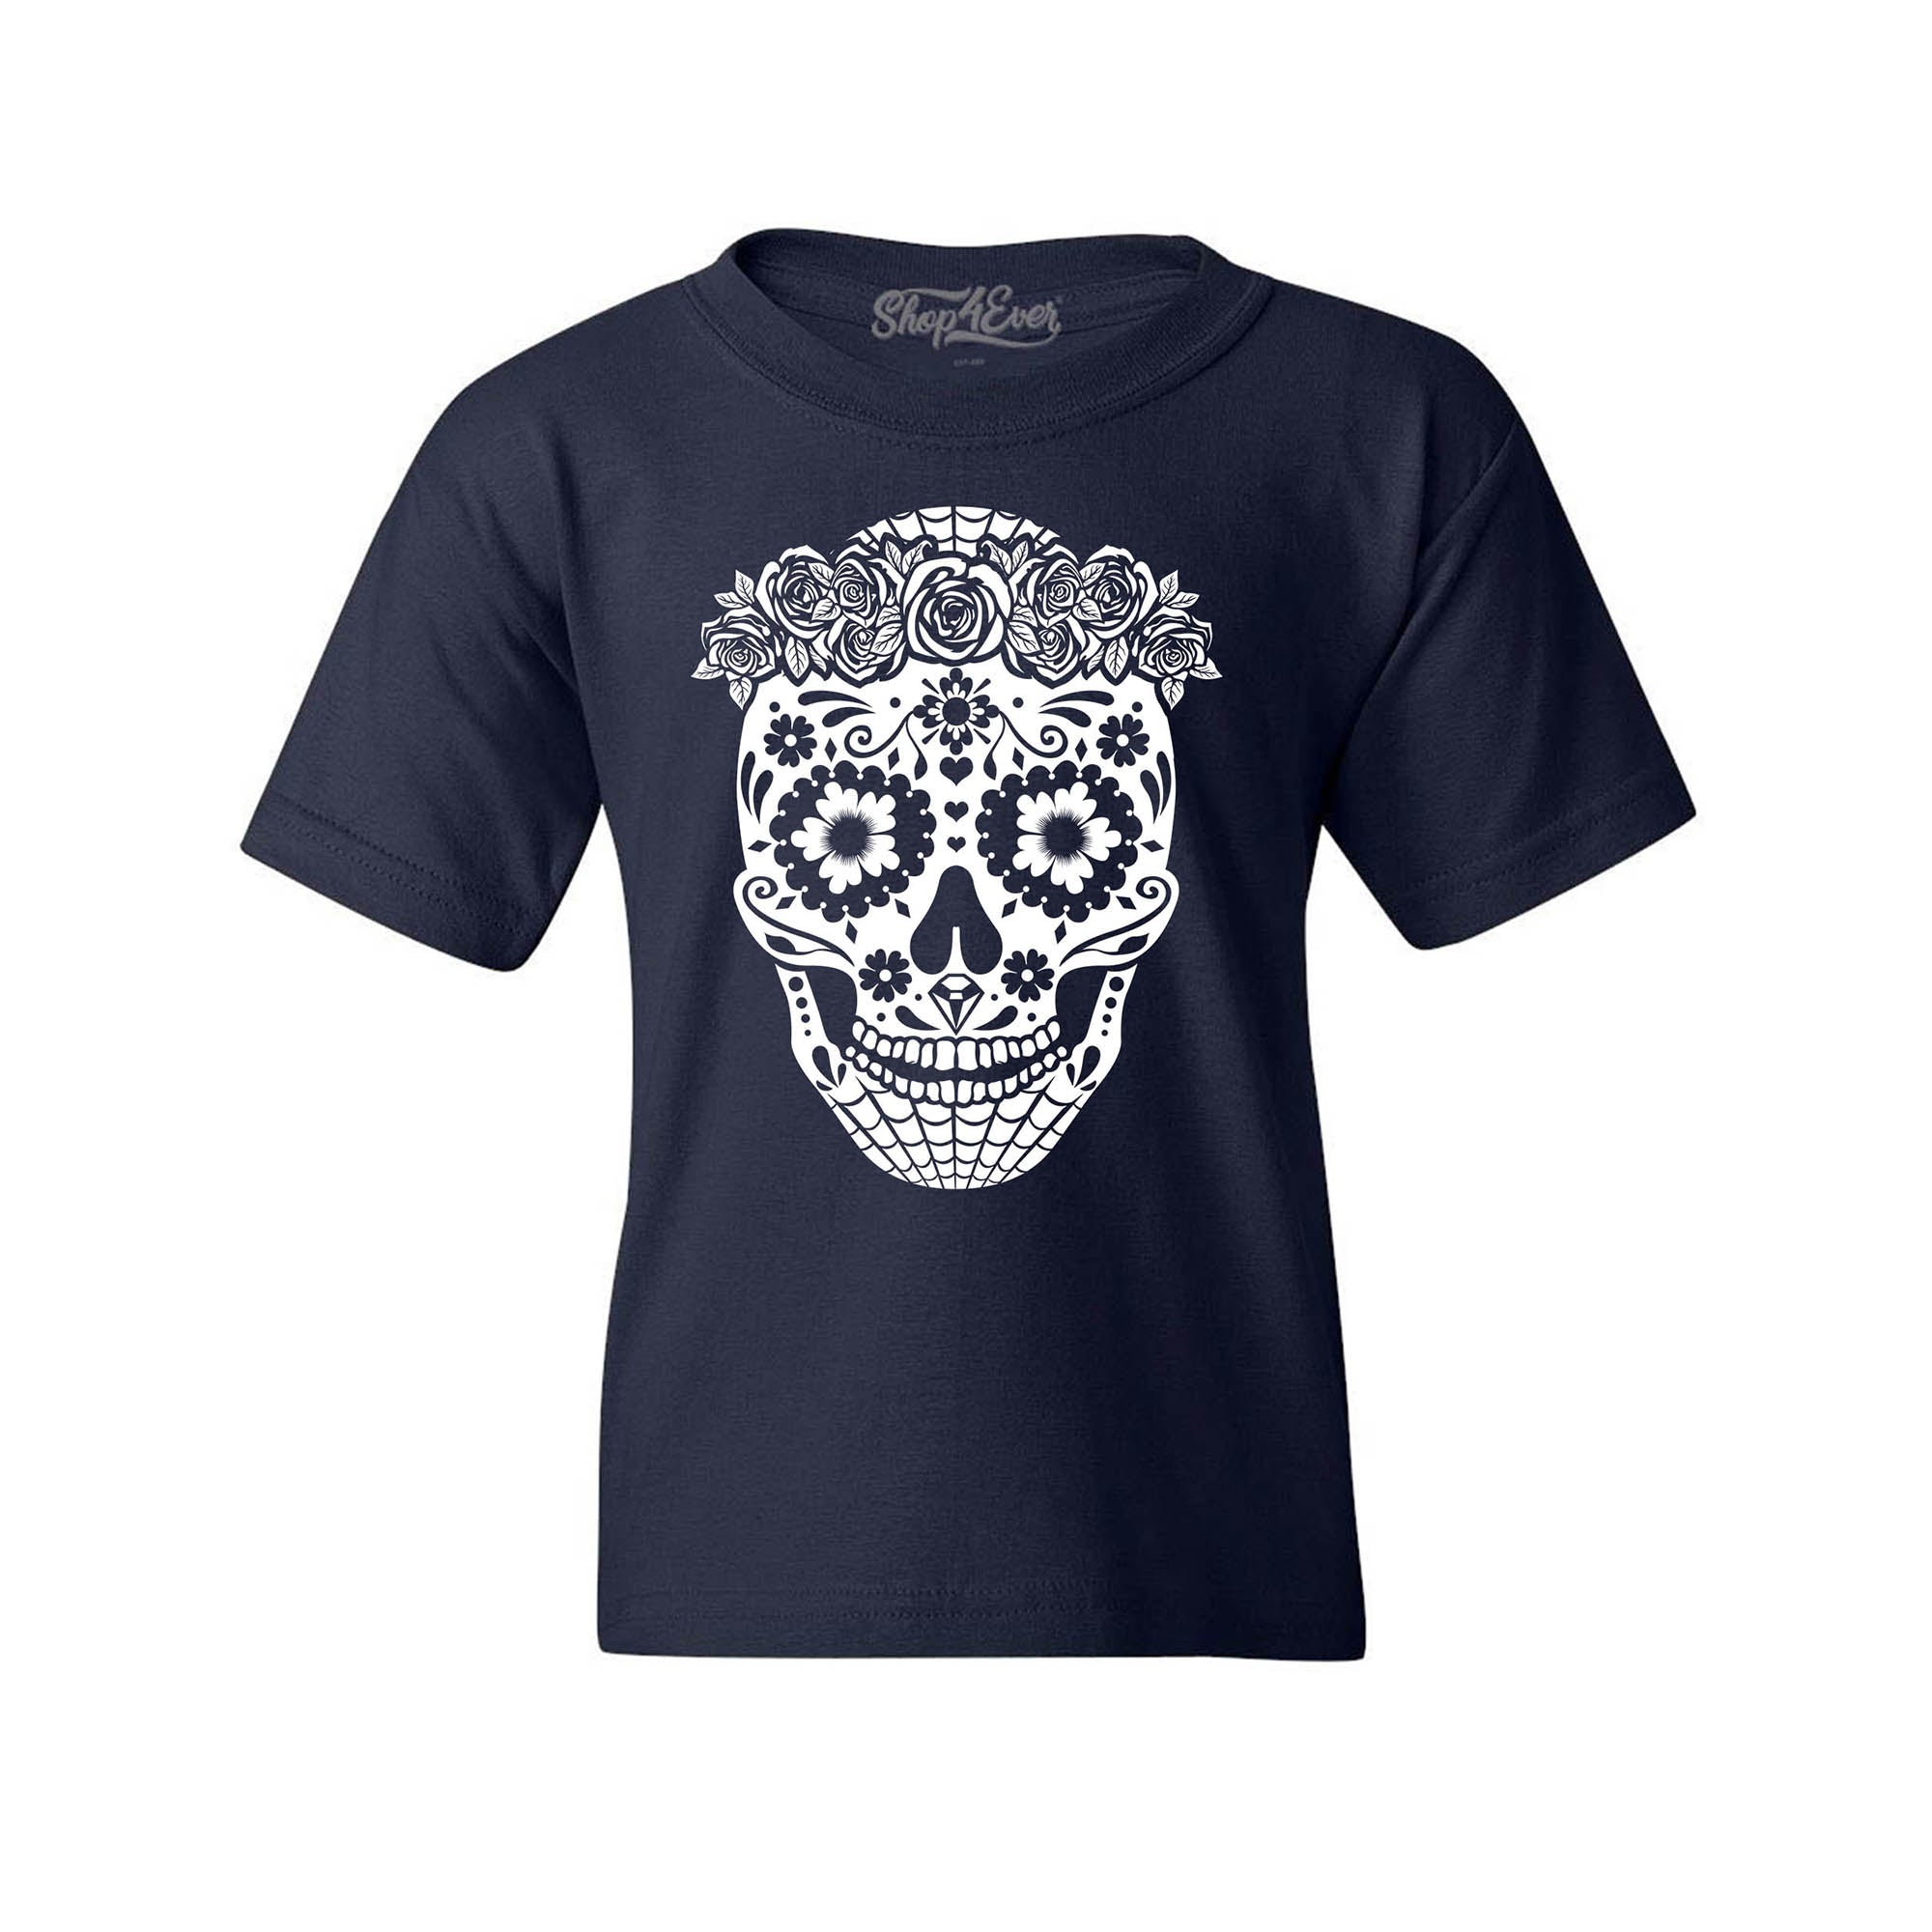 Floral Day of The Dead Girl Skull Youth's T-Shirt